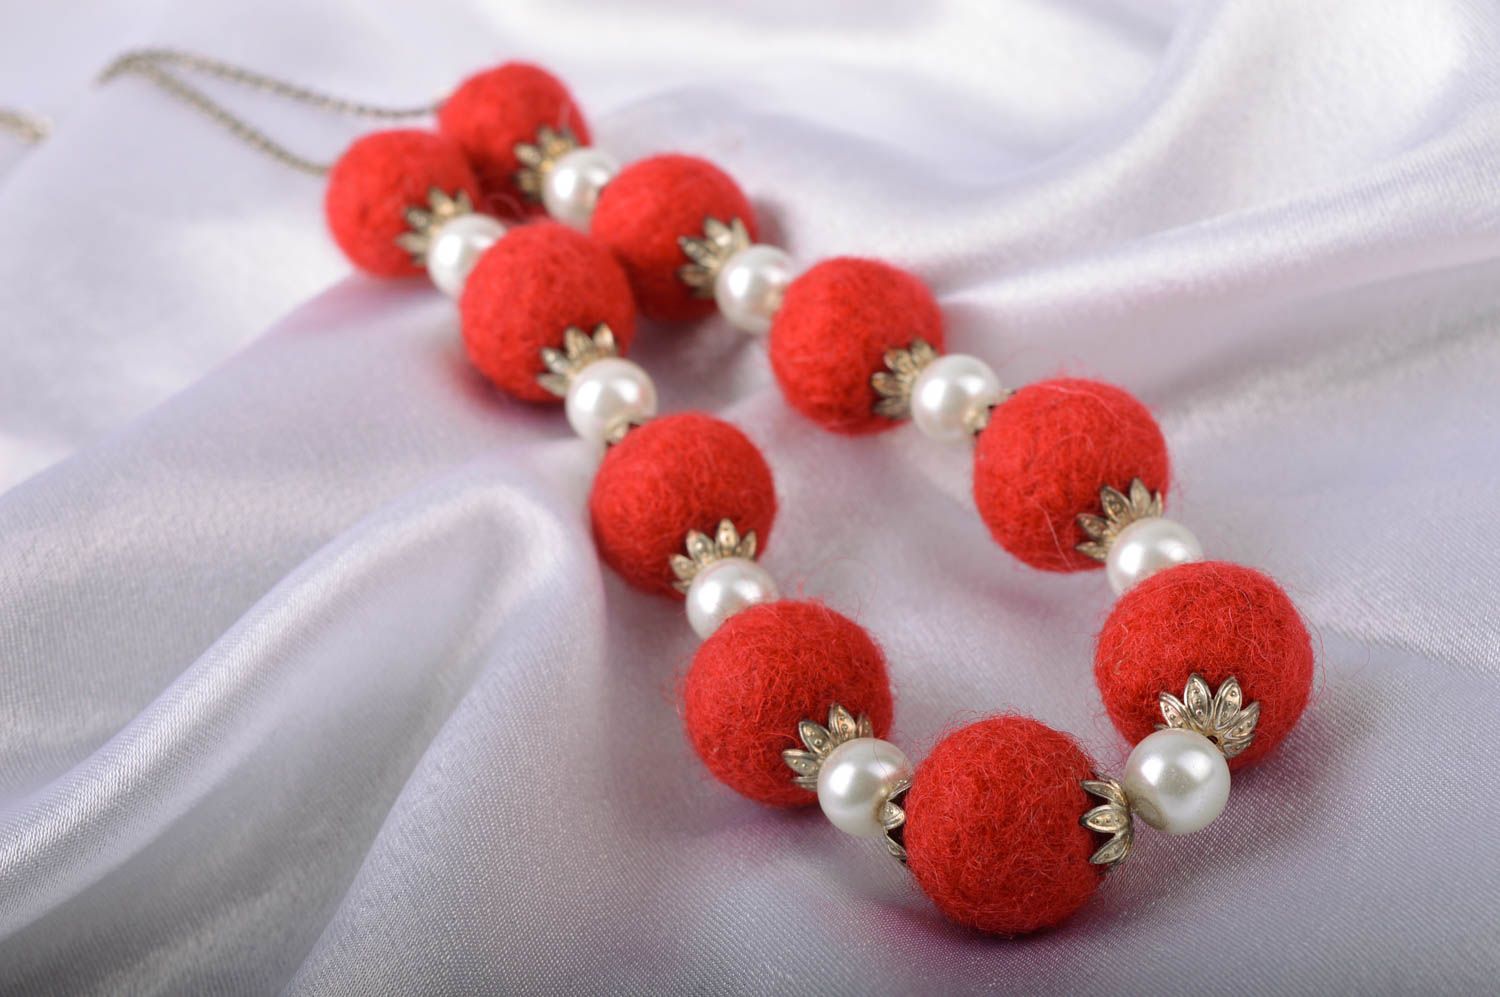 Wool felting beaded necklace with artificial pearls stylish handmade accessory photo 1